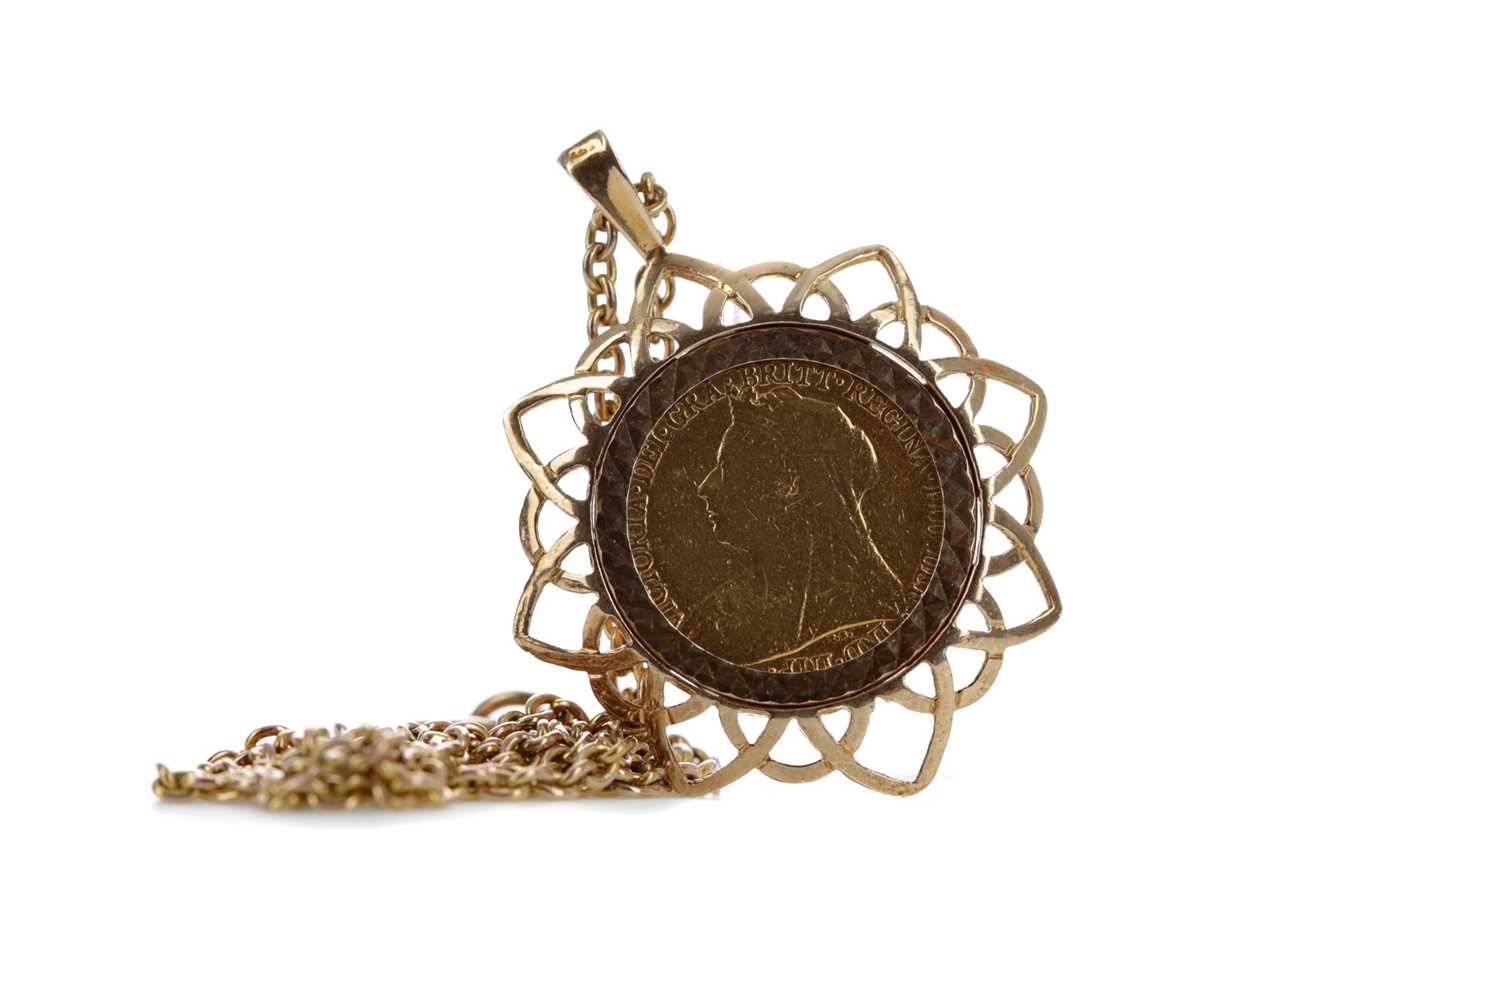 Lot 11 - A HALF SOVEREIGN DATED 1899 MOUNTED IN A PENDANT